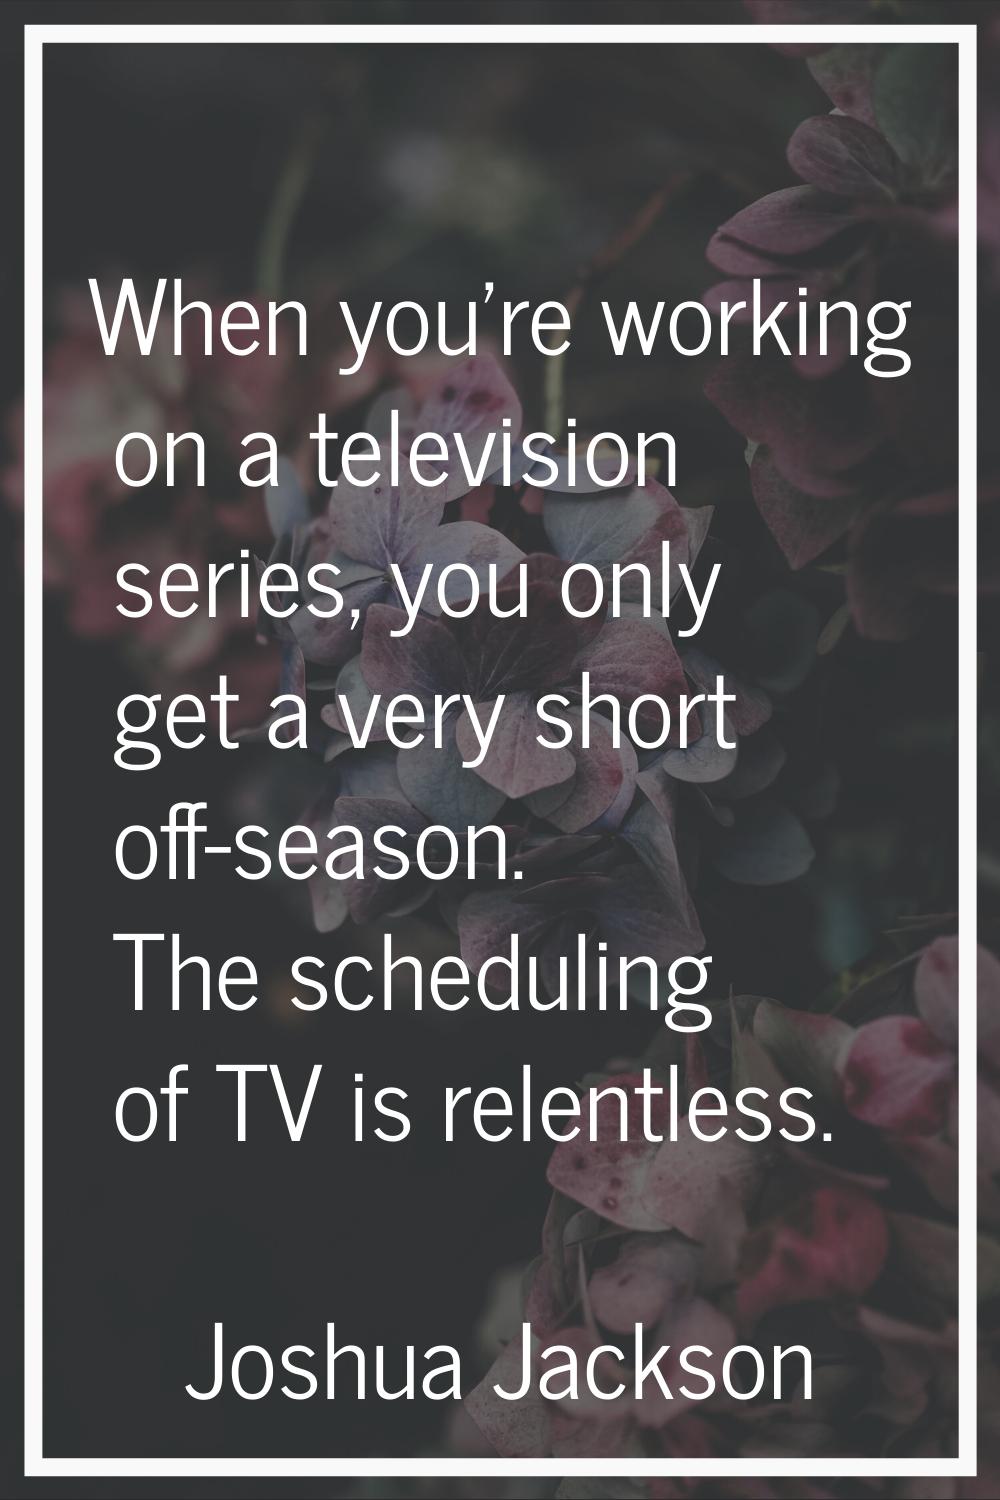 When you're working on a television series, you only get a very short off-season. The scheduling of